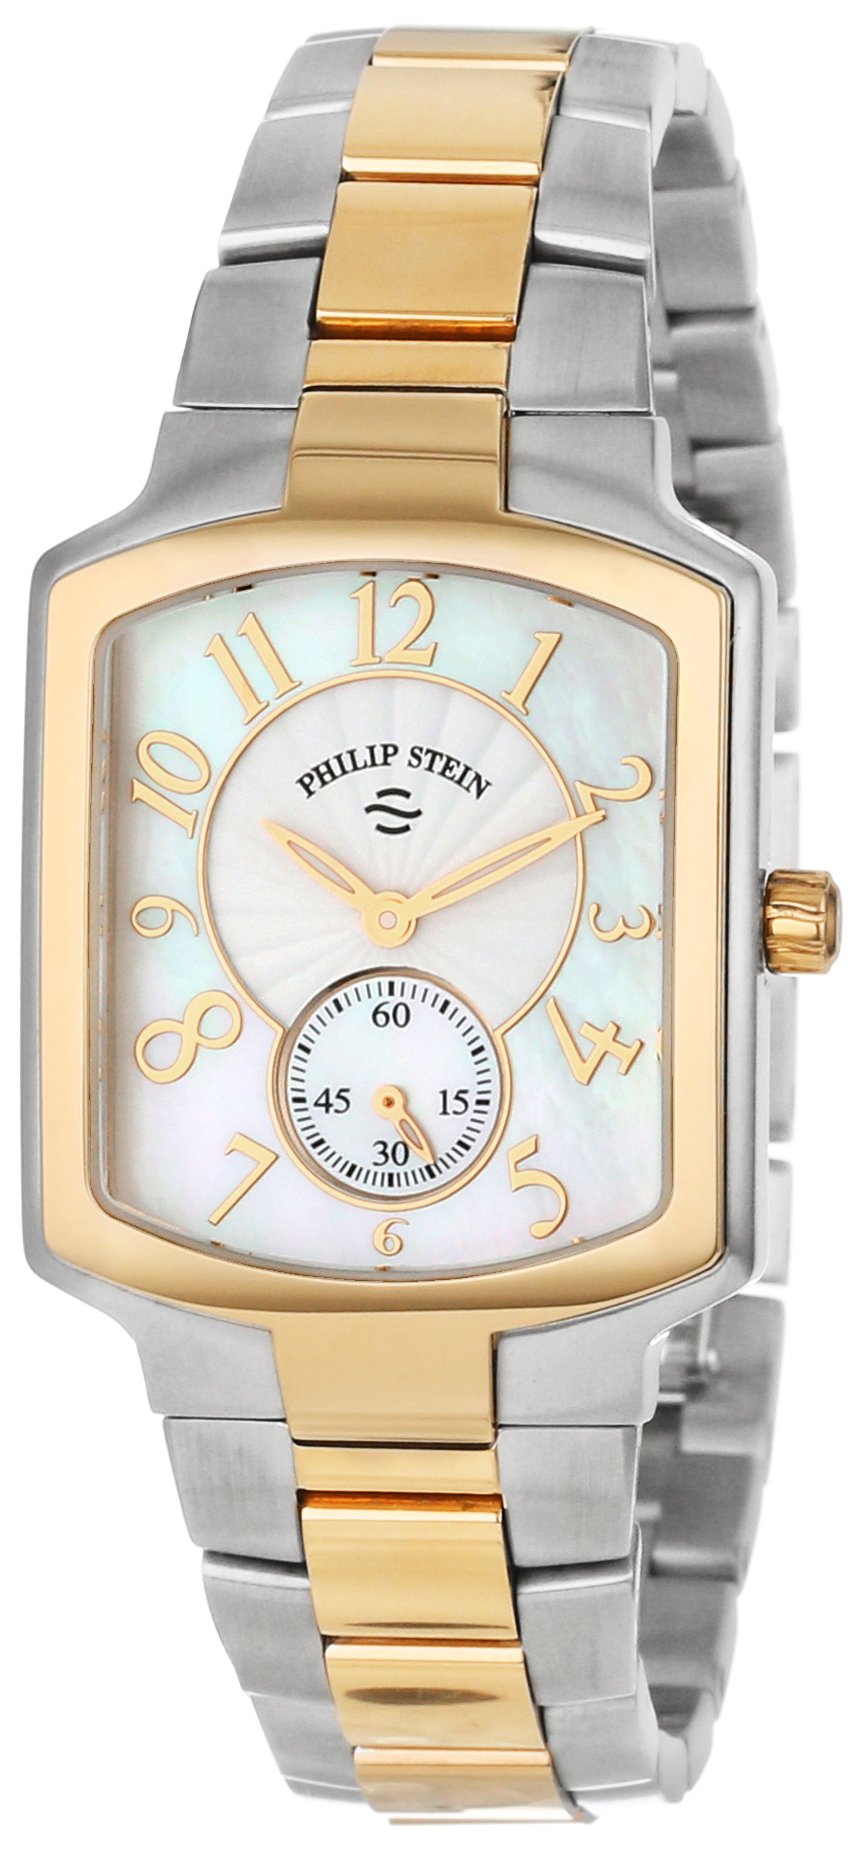 Philip Stein Women's 21TG-FW-SSTG Classic Two-Tone Gold Plated Two-Tone Gold Bracelet Watch